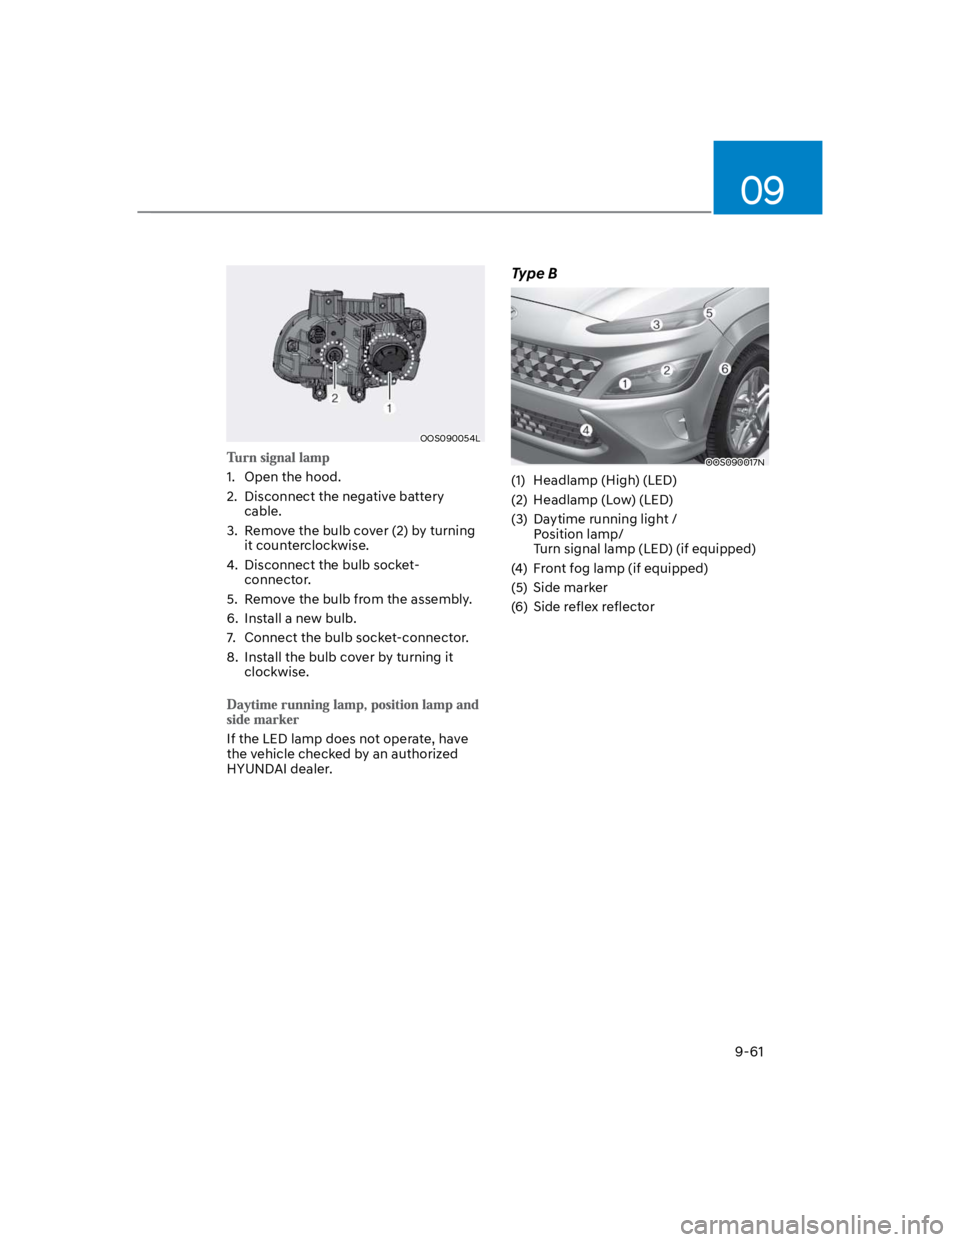 HYUNDAI KONA 2022 User Guide 09
9-61
OOS090054L
1.  Open the hood.
2.  Disconnect the negative battery 
cable.
3.  Remove the bulb cover (2) by turning 
it counterclockwise.
4.  Disconnect the bulb socket-
connector. 
5.  Remove 